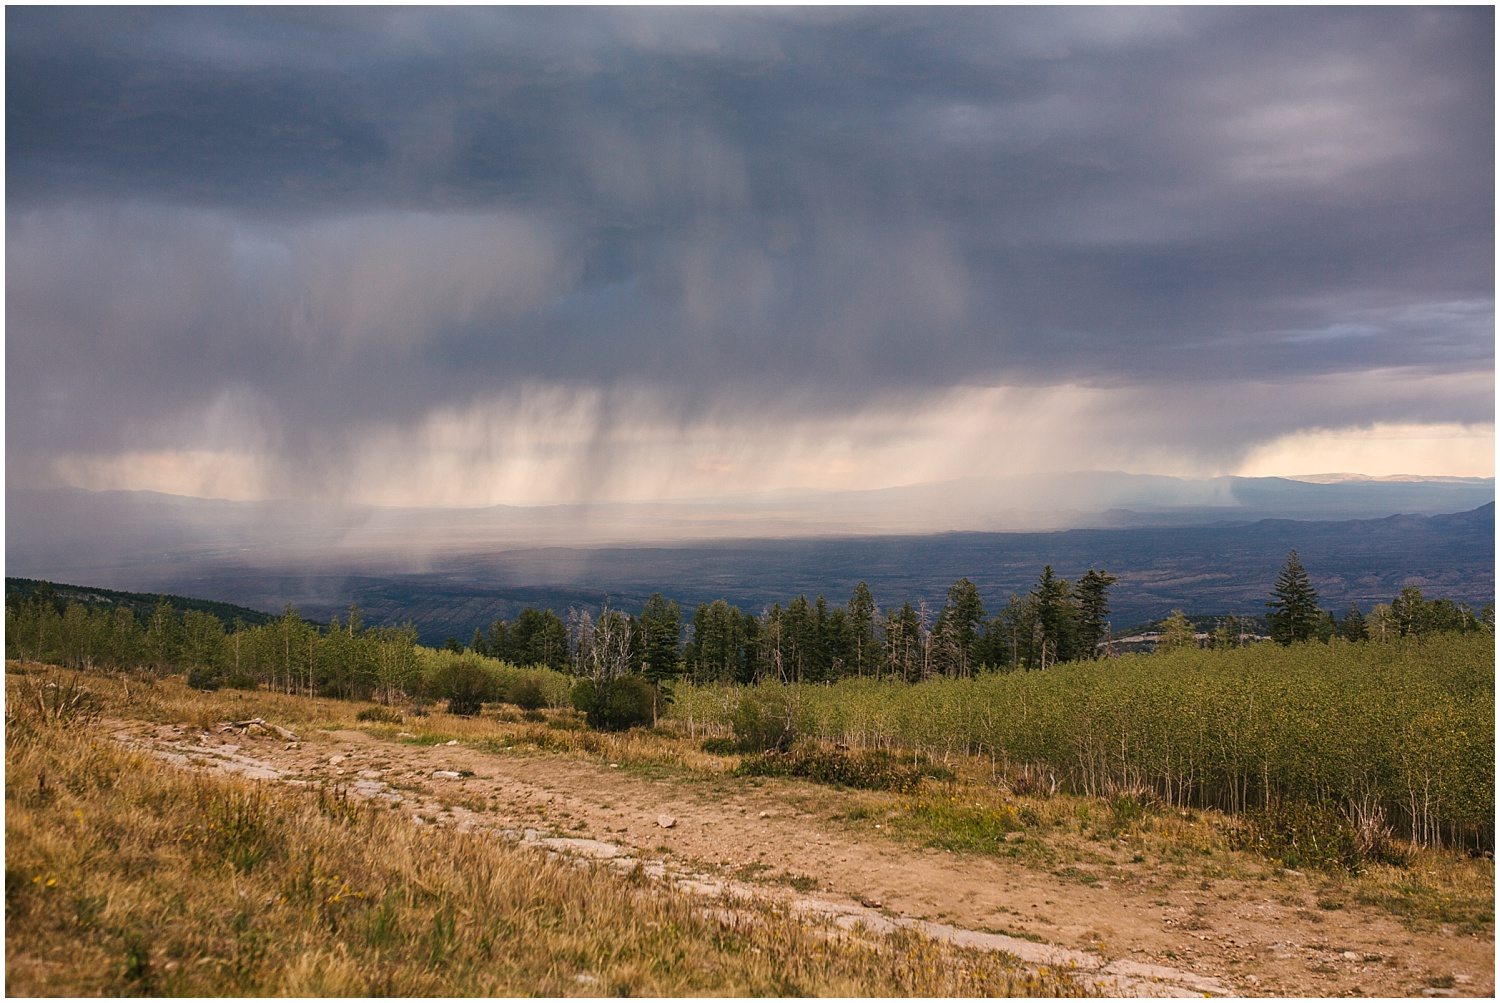 summer storm clouds rolling in over Sandia Mountains outside Albuquerque, New Mexico